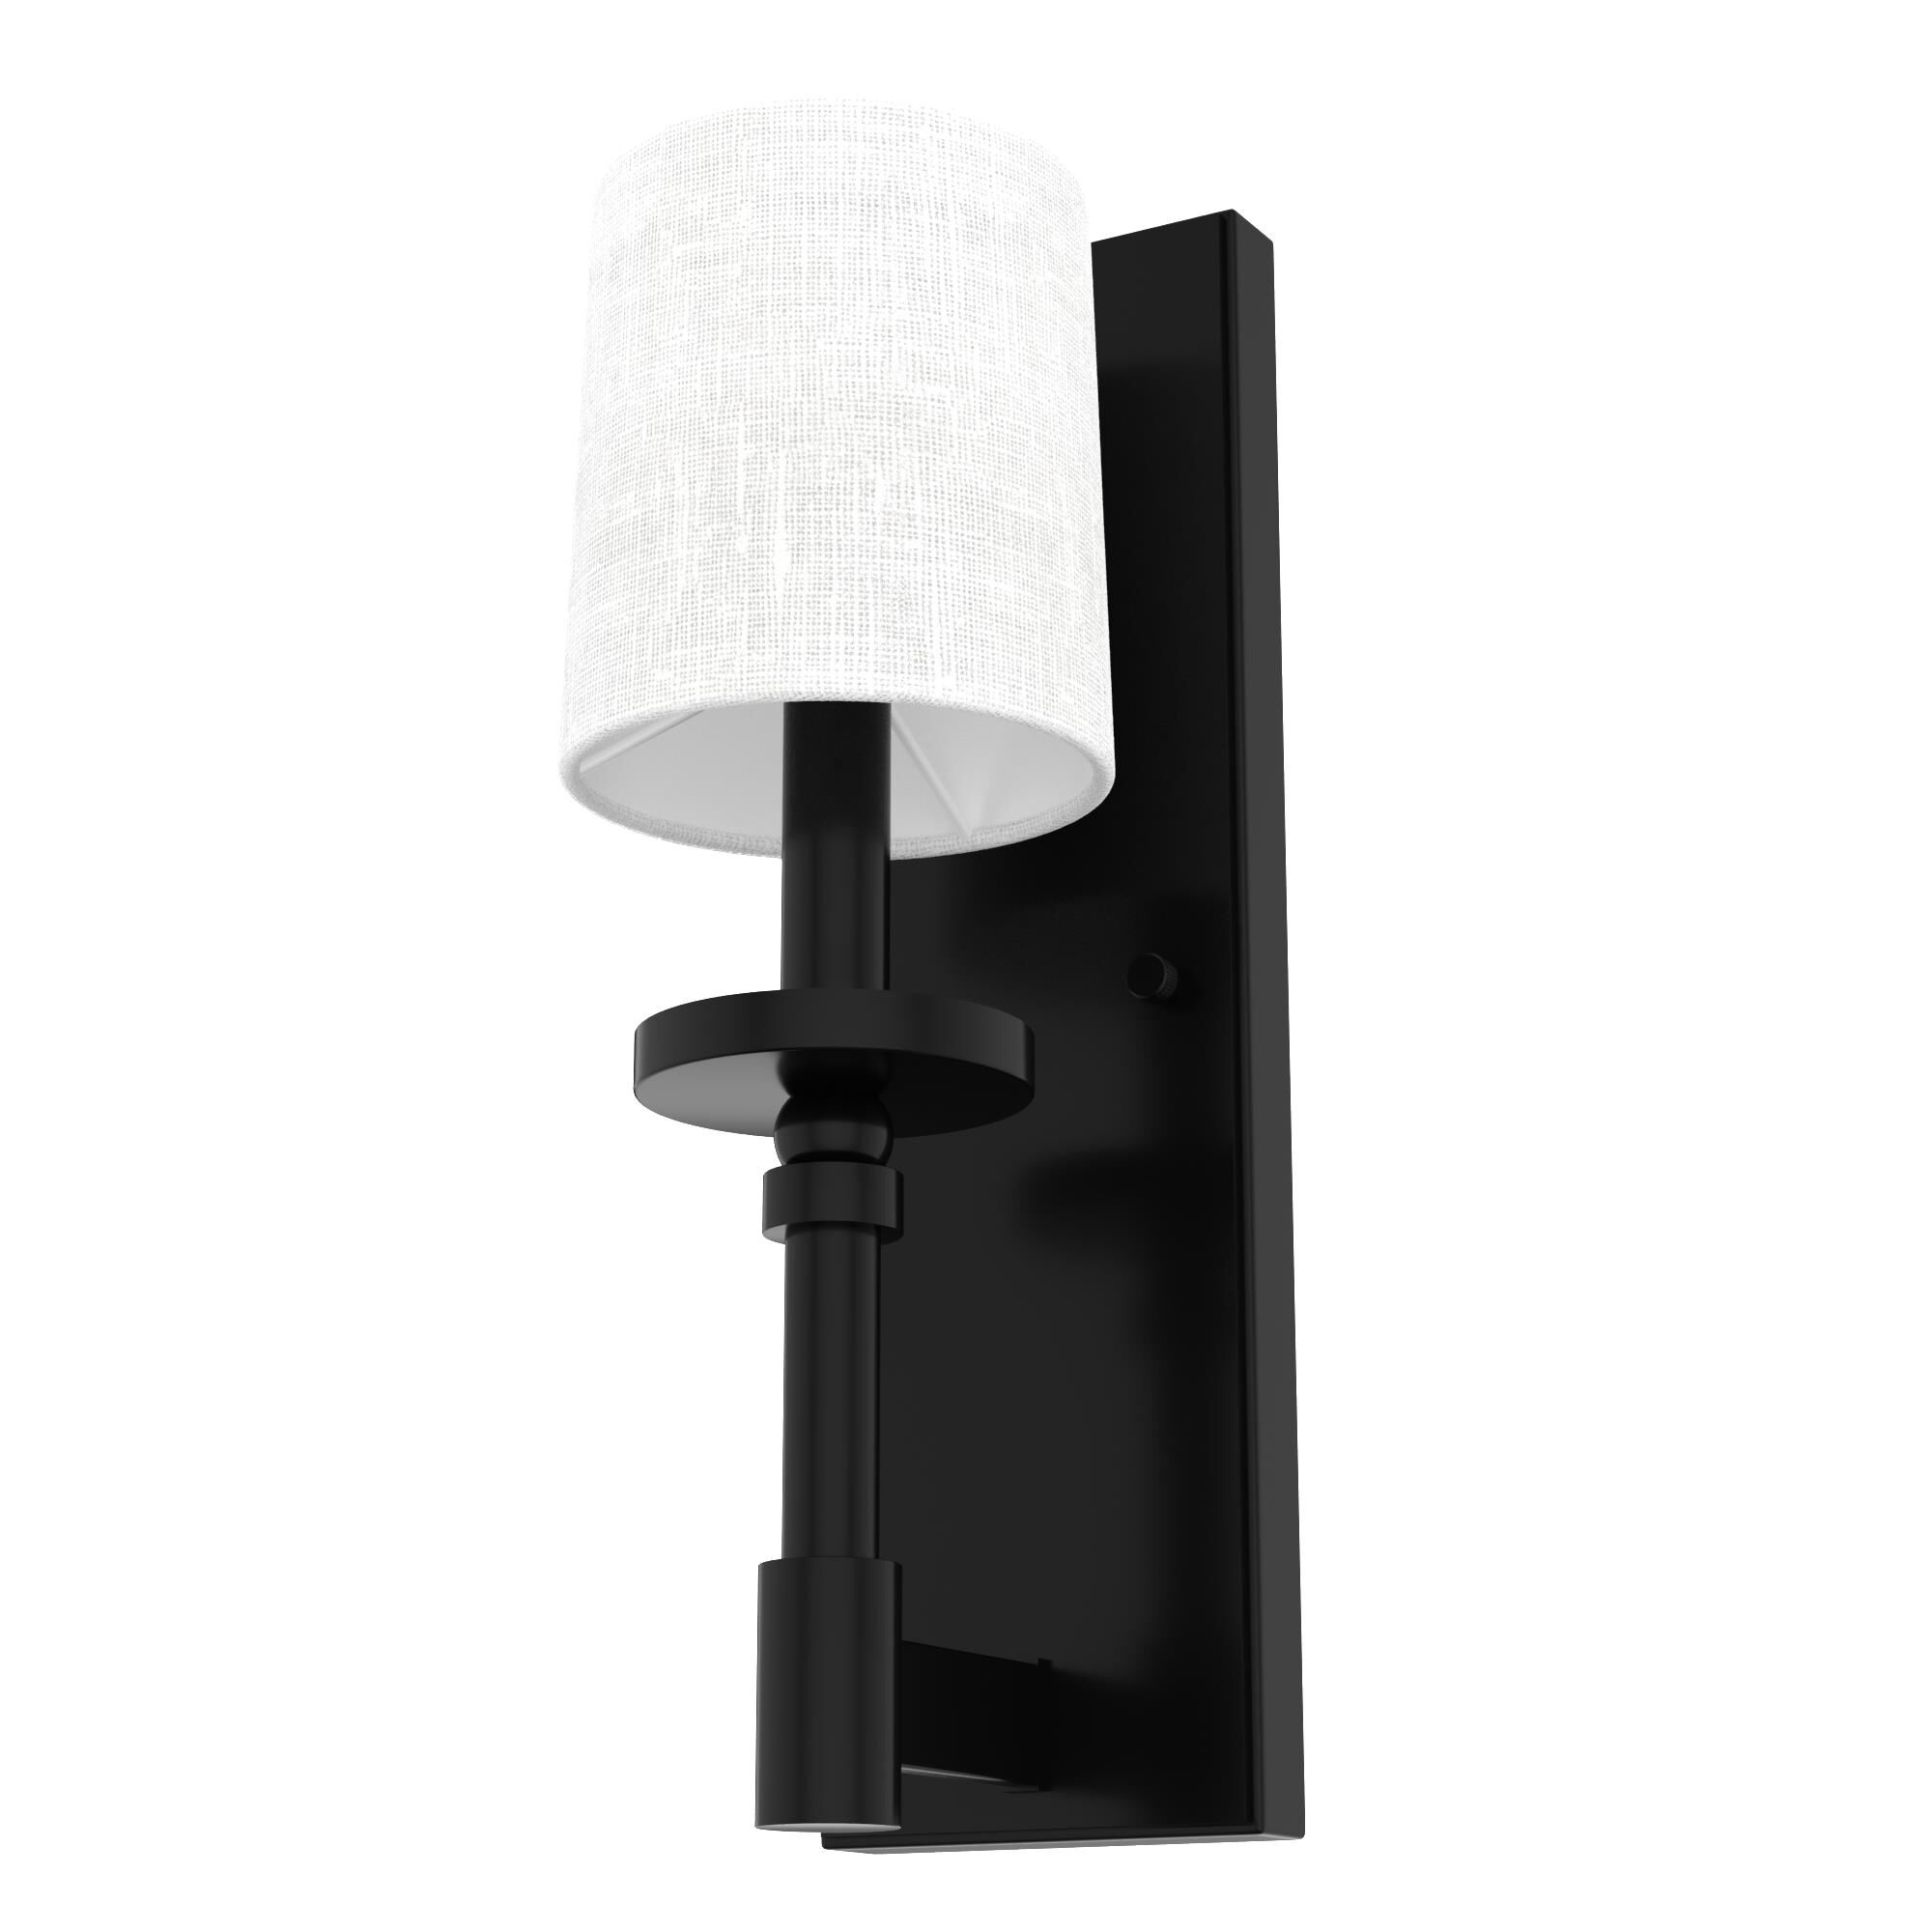 Photos - Chandelier / Lamp Hunter Fan Briargrove 14 Inch Wall Sconce Briargrove - 19692 - Modern Cont 